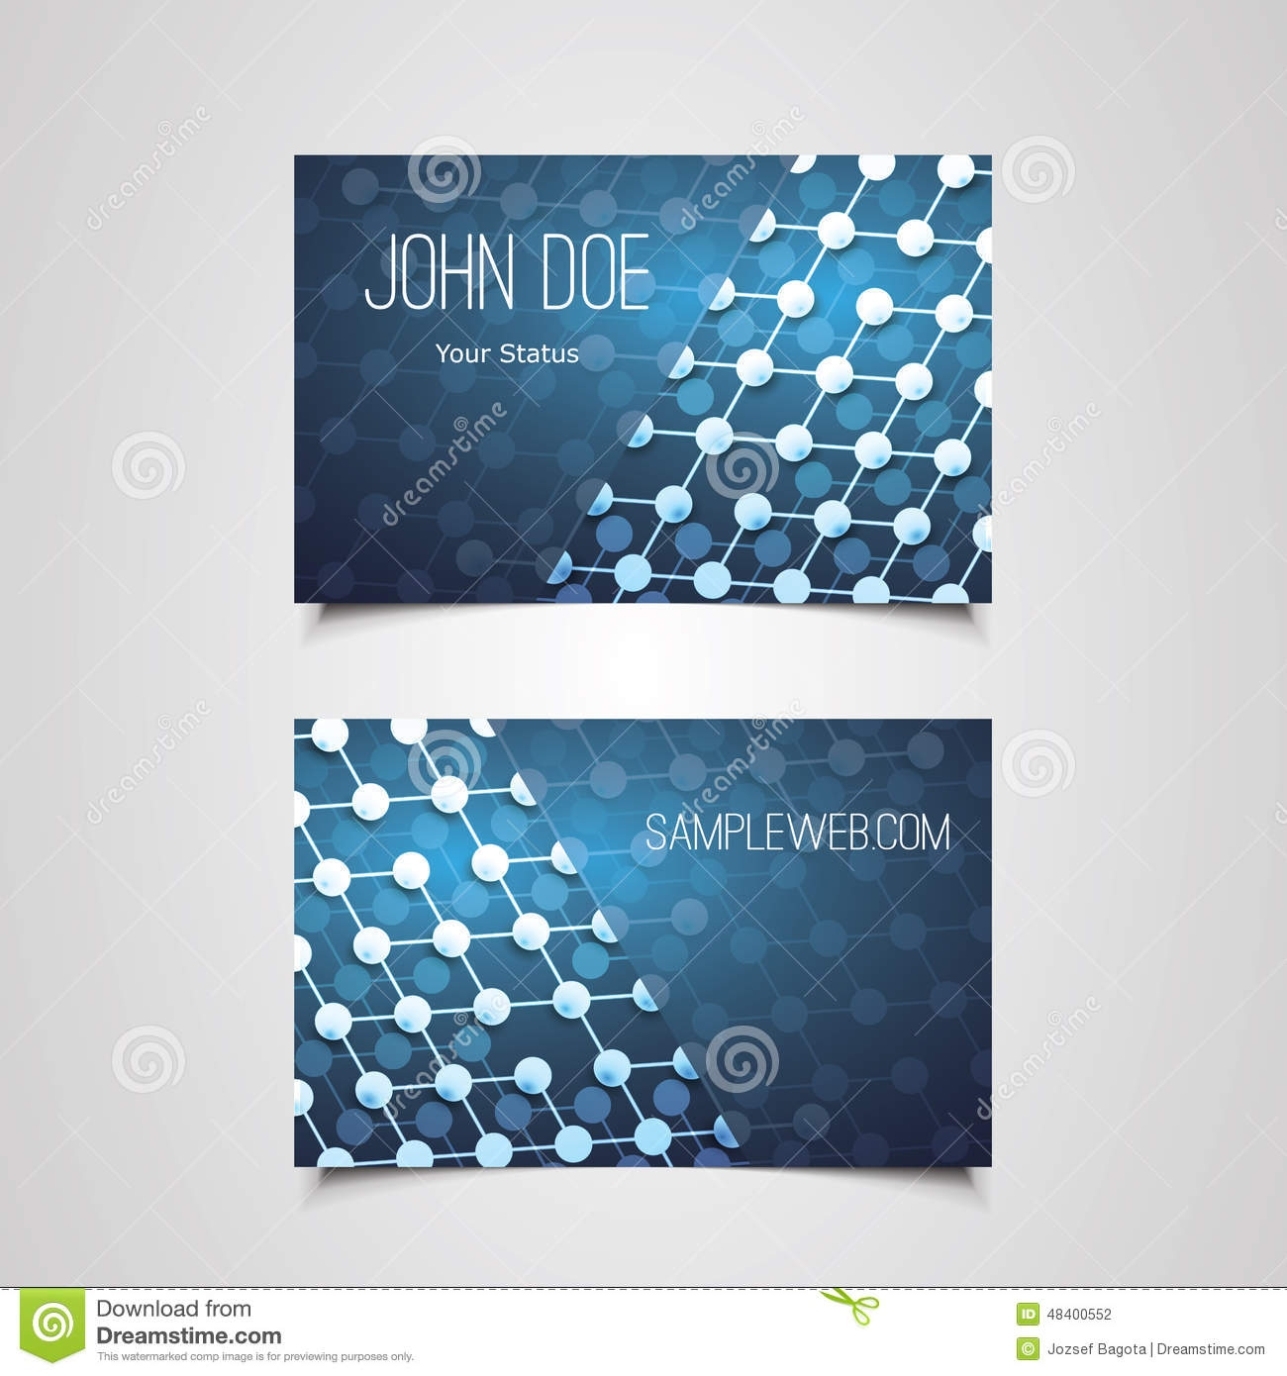 Business Card Template With Abstract Network Connections Pattern Design Stock Vector within Networking Card Template